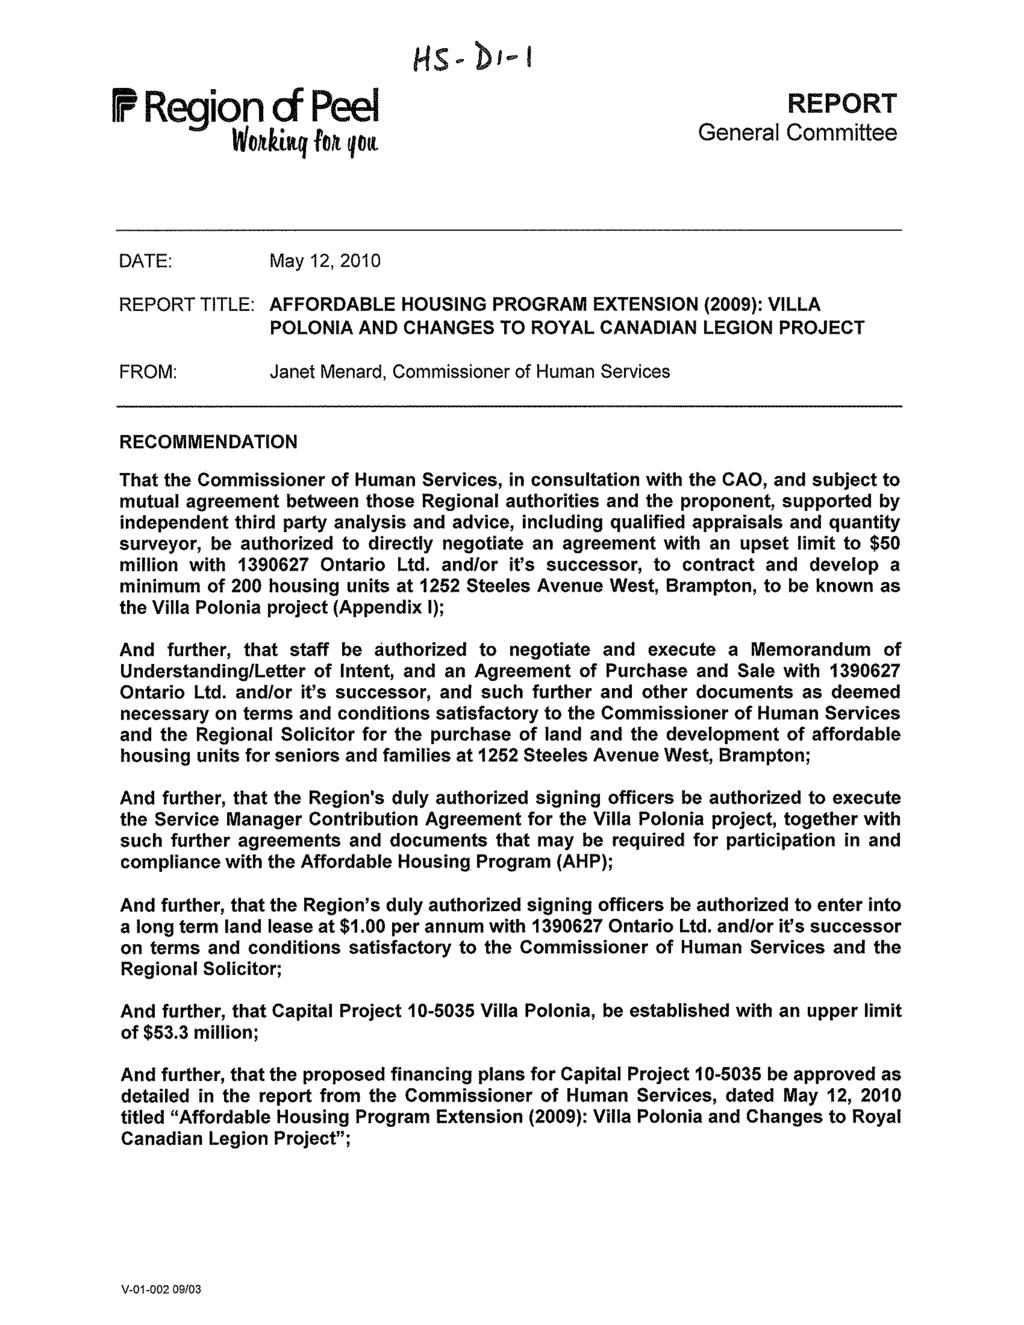 C Region d Ped Wonkiq fon you REPORT General Committee DATE: May 12,2010 REPORT TITLE: AFFORDABLE HOUSING PROGRAM EXTENSION (2009): VILLA POLONIA AND CHANGES TO ROYAL CANADIAN LEGION PROJECT FROM: